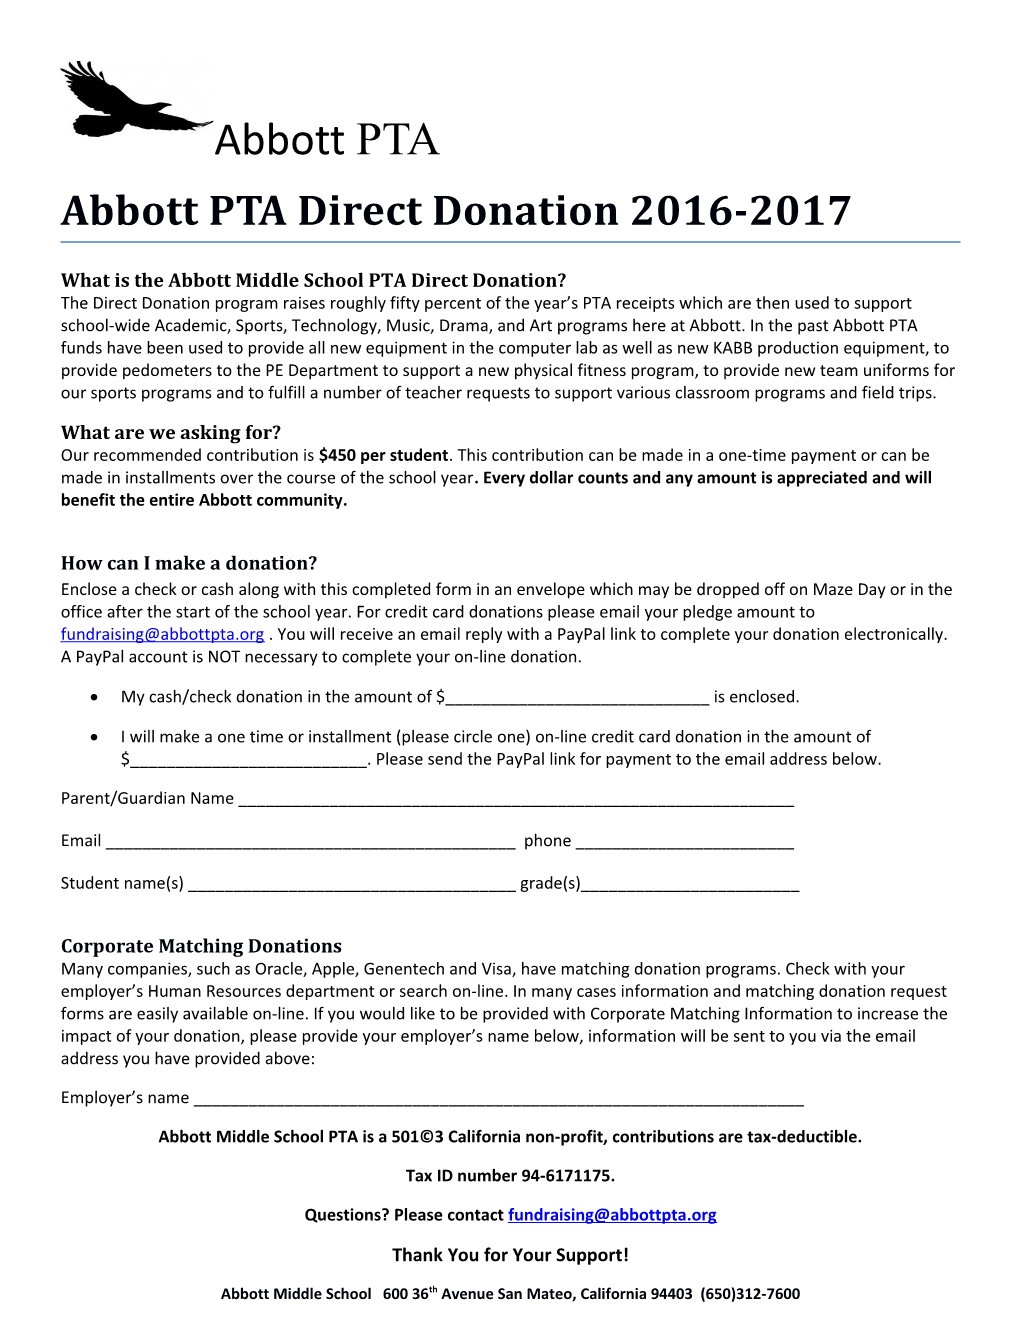 What Is the Abbott Middle School PTA Direct Donation?